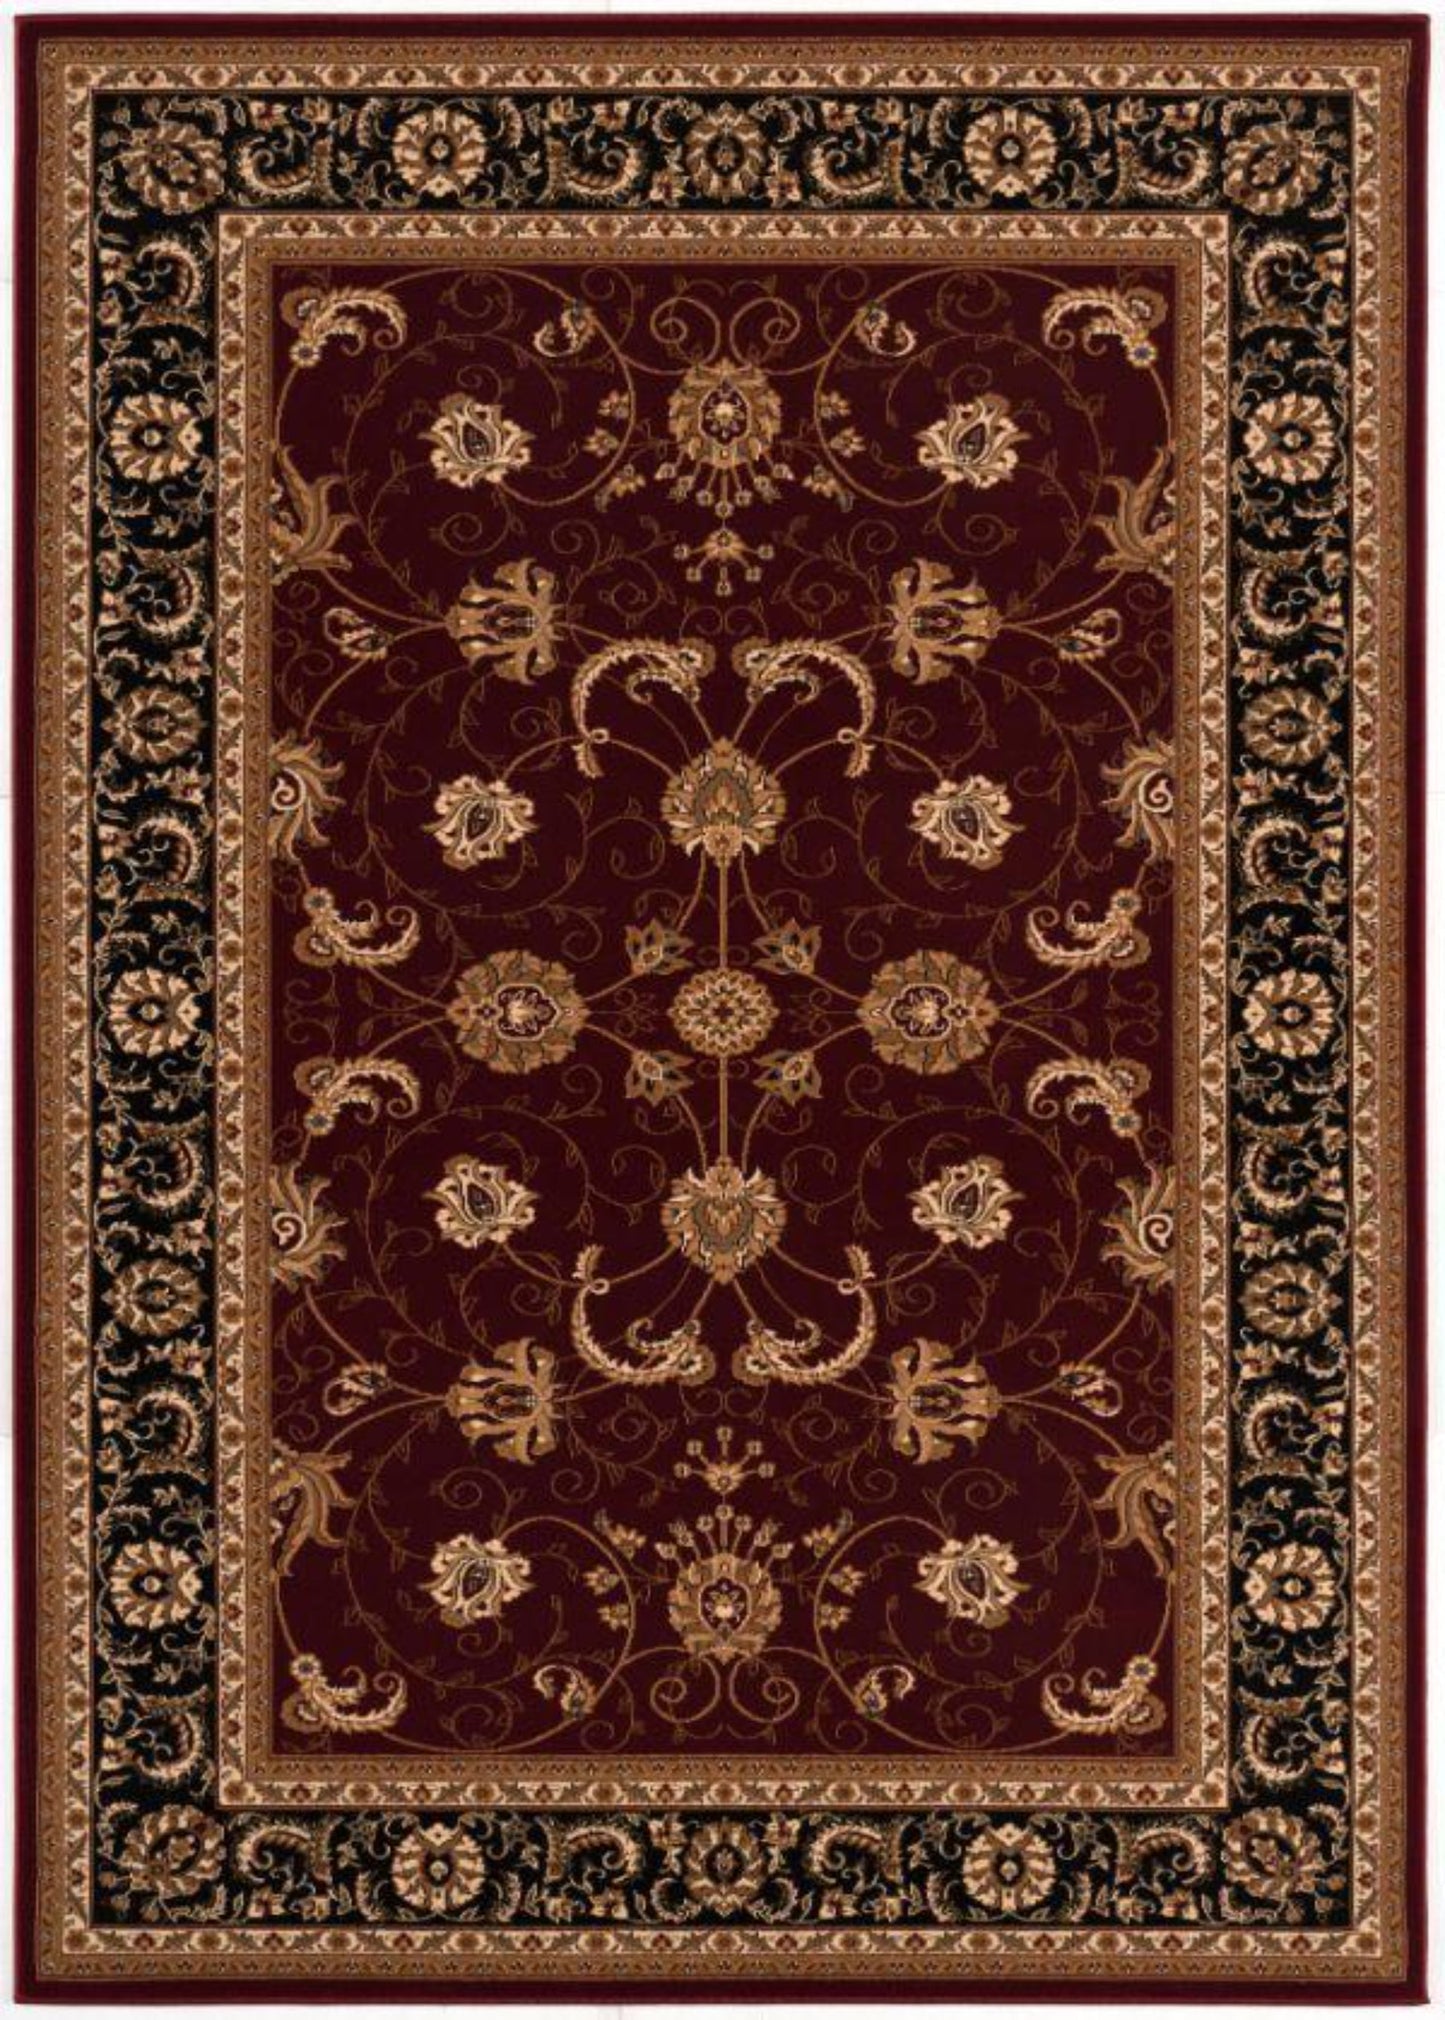 Majestic Persian Red Rug